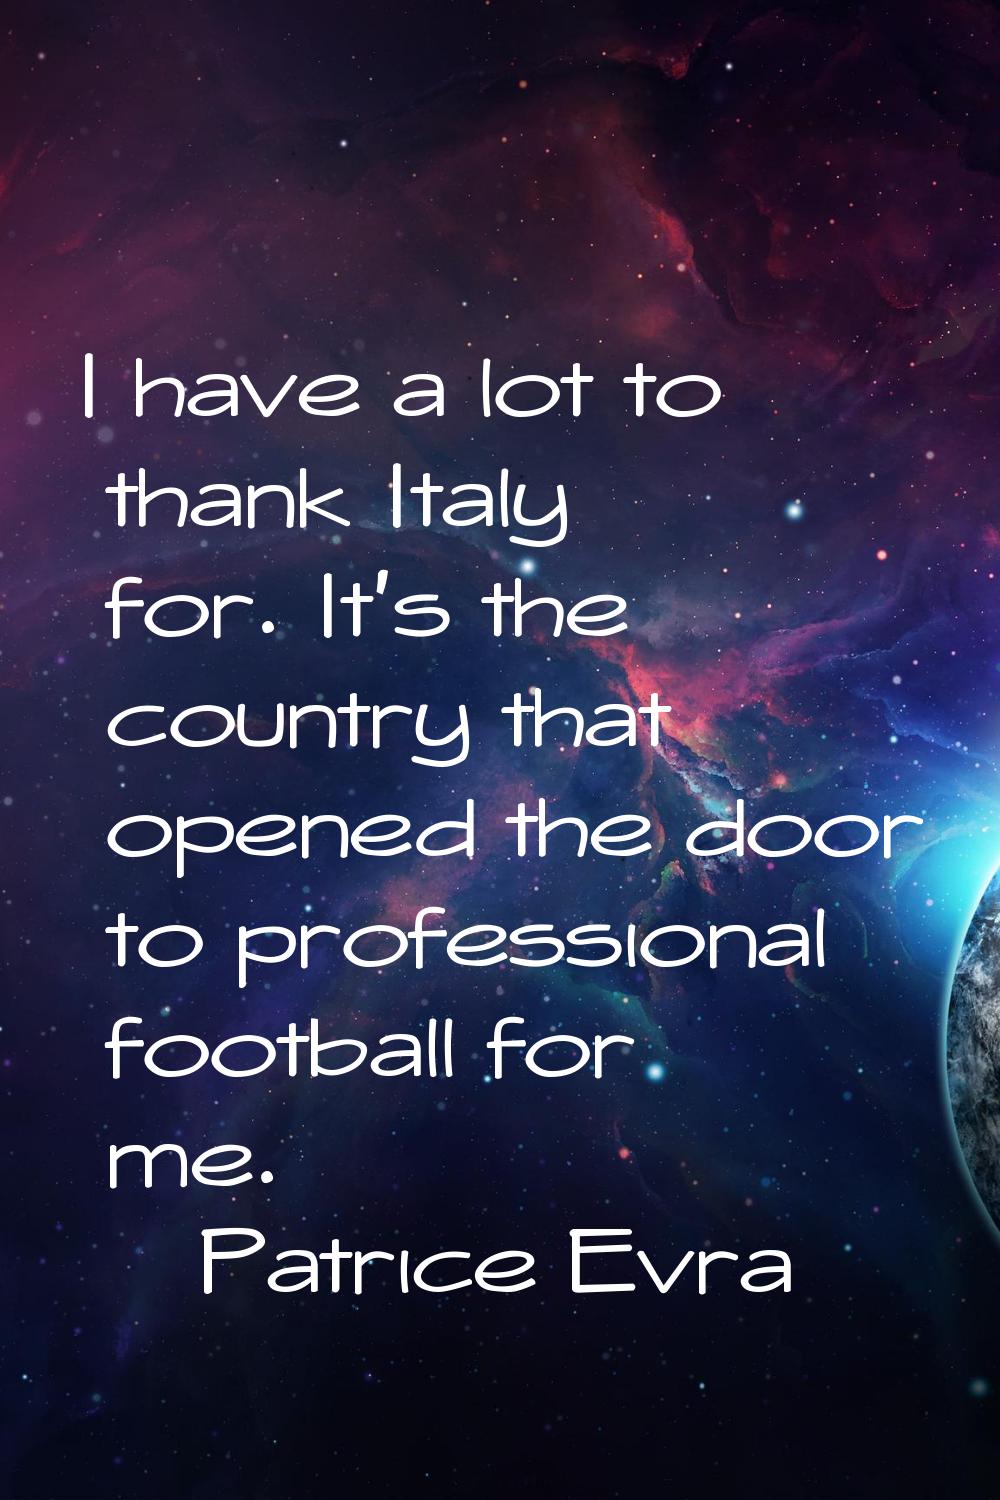 I have a lot to thank Italy for. It's the country that opened the door to professional football for